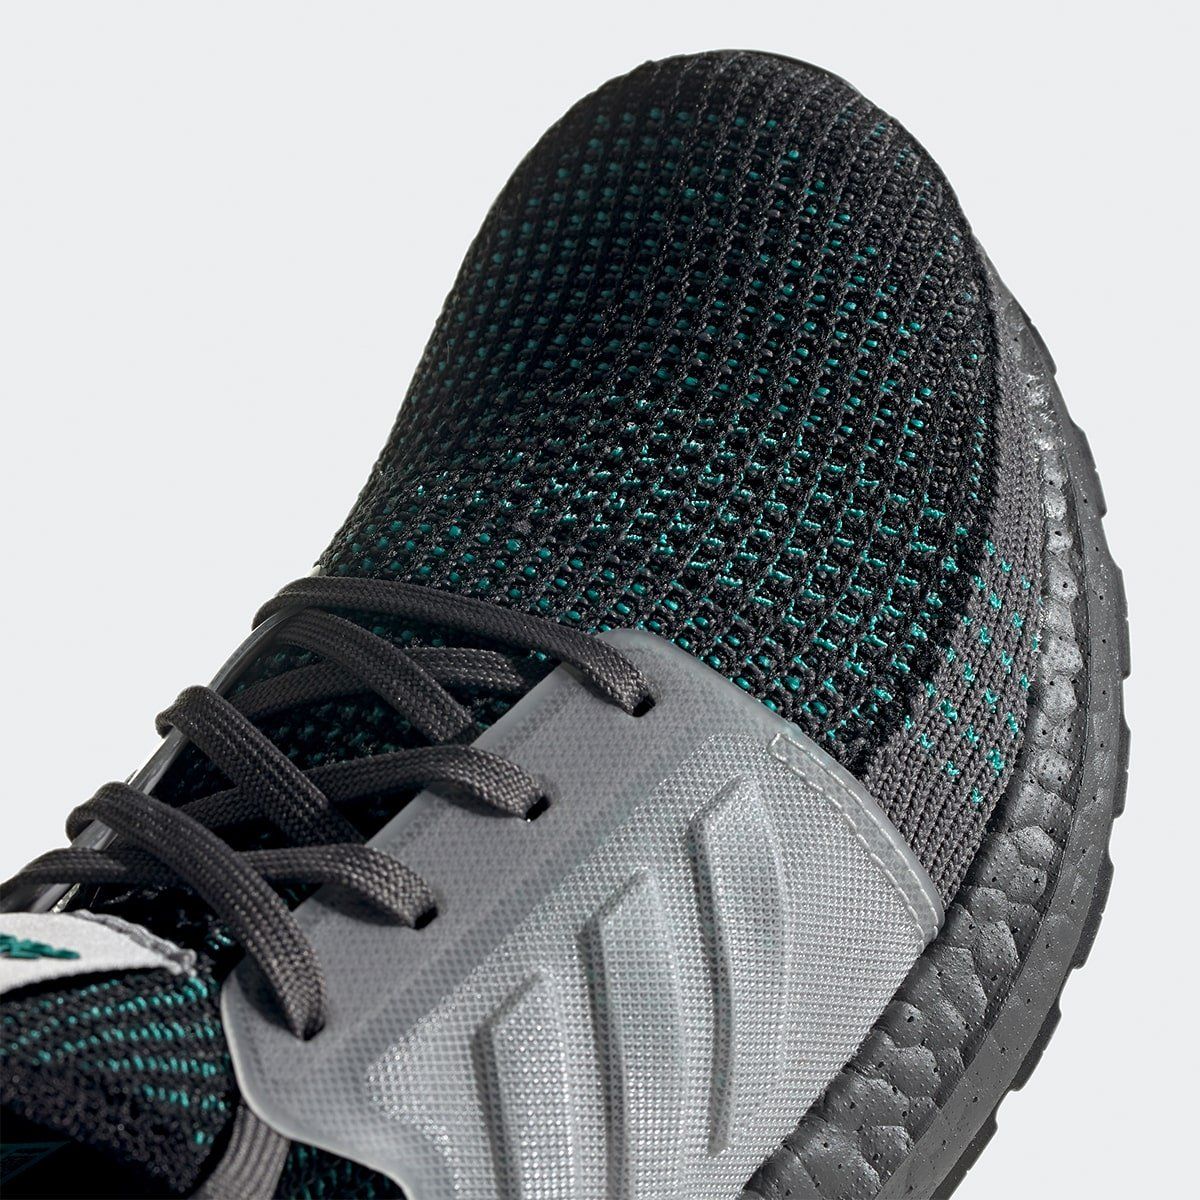 black and teal ultra boost